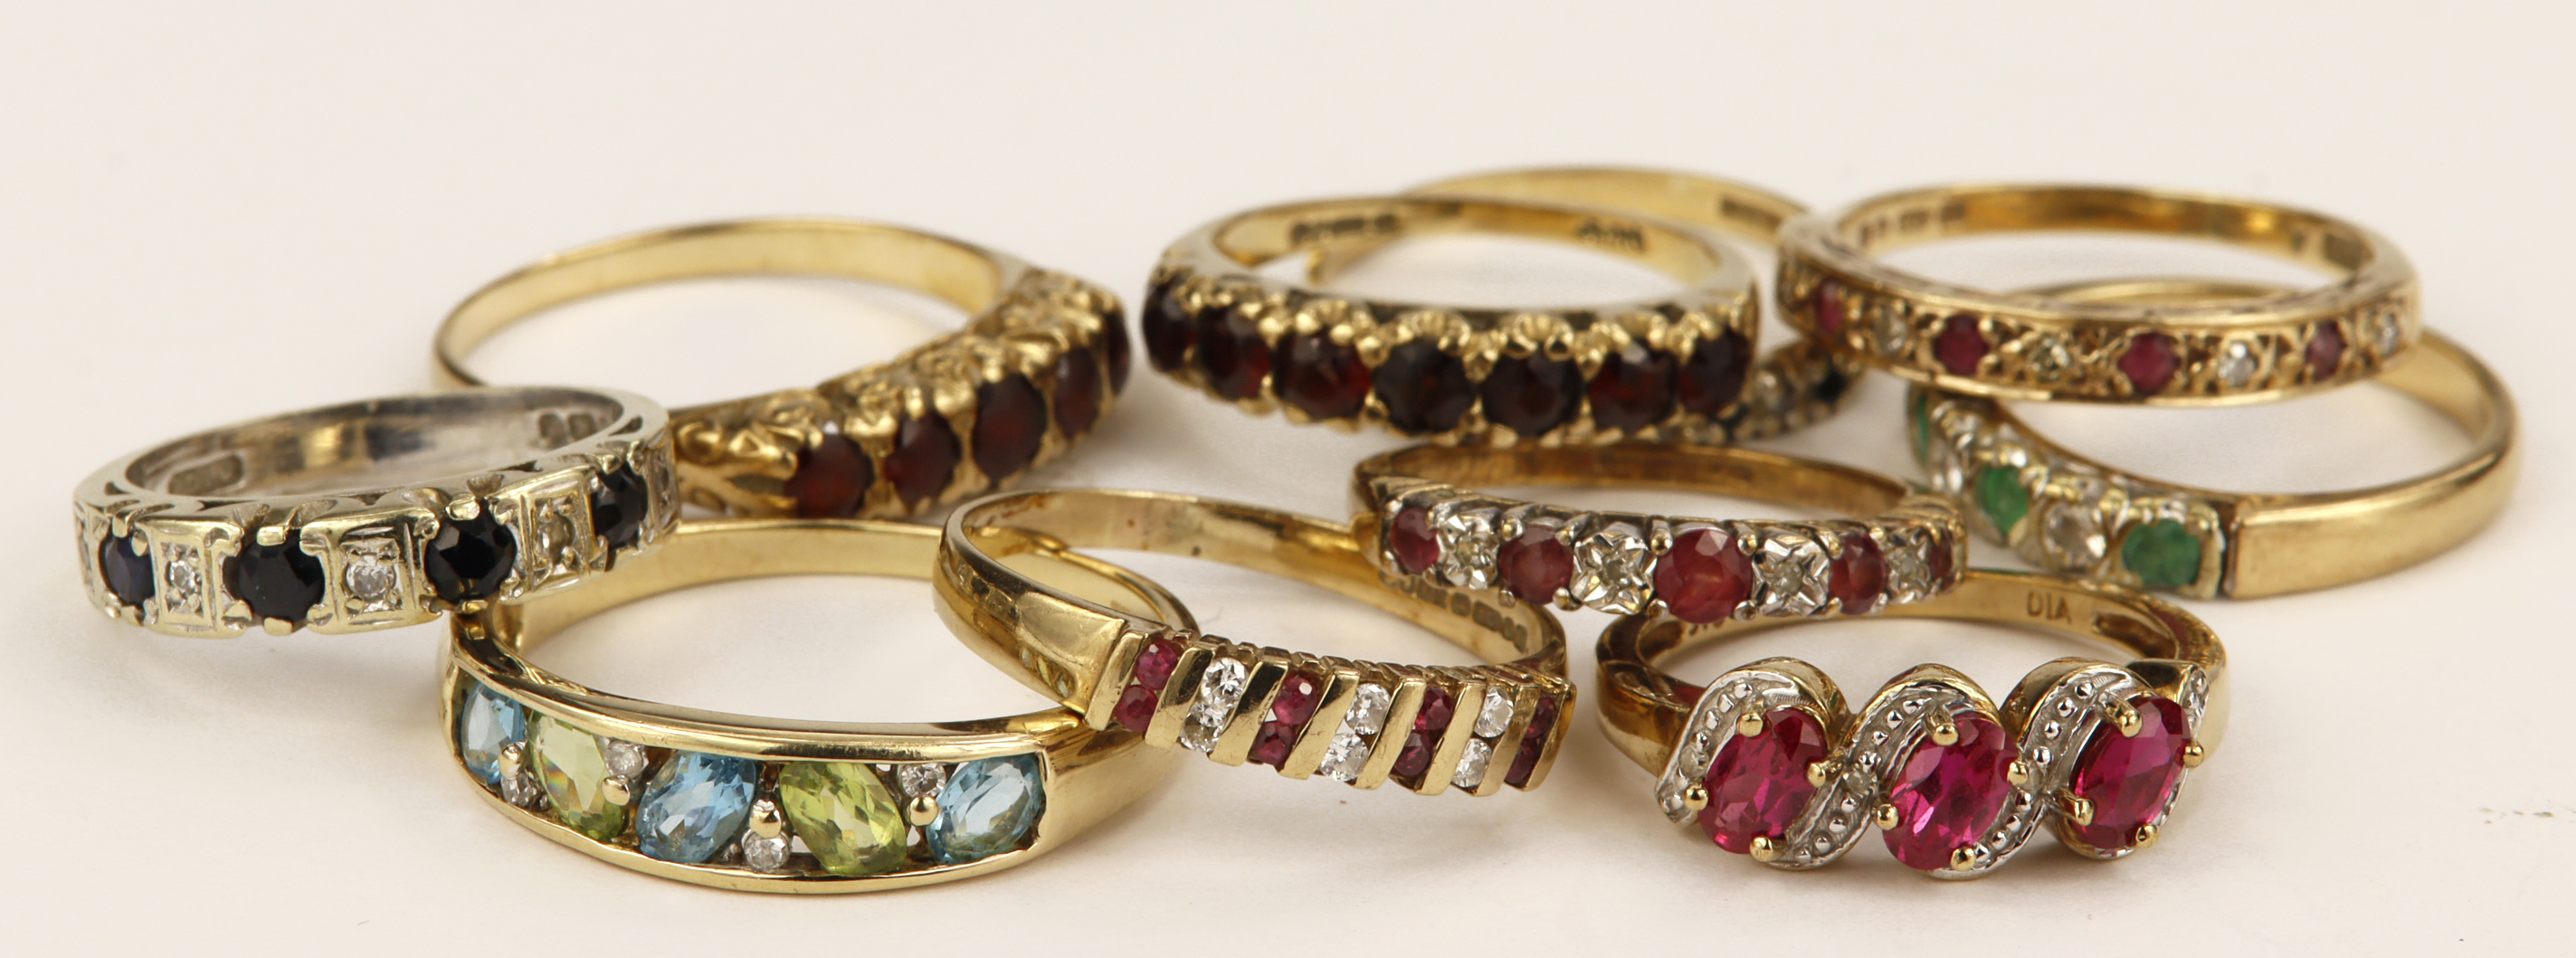 Ten 9ct gold gemset eternity rings, stones include diamond, ruby, sapphire, emerald, synthetic ruby,